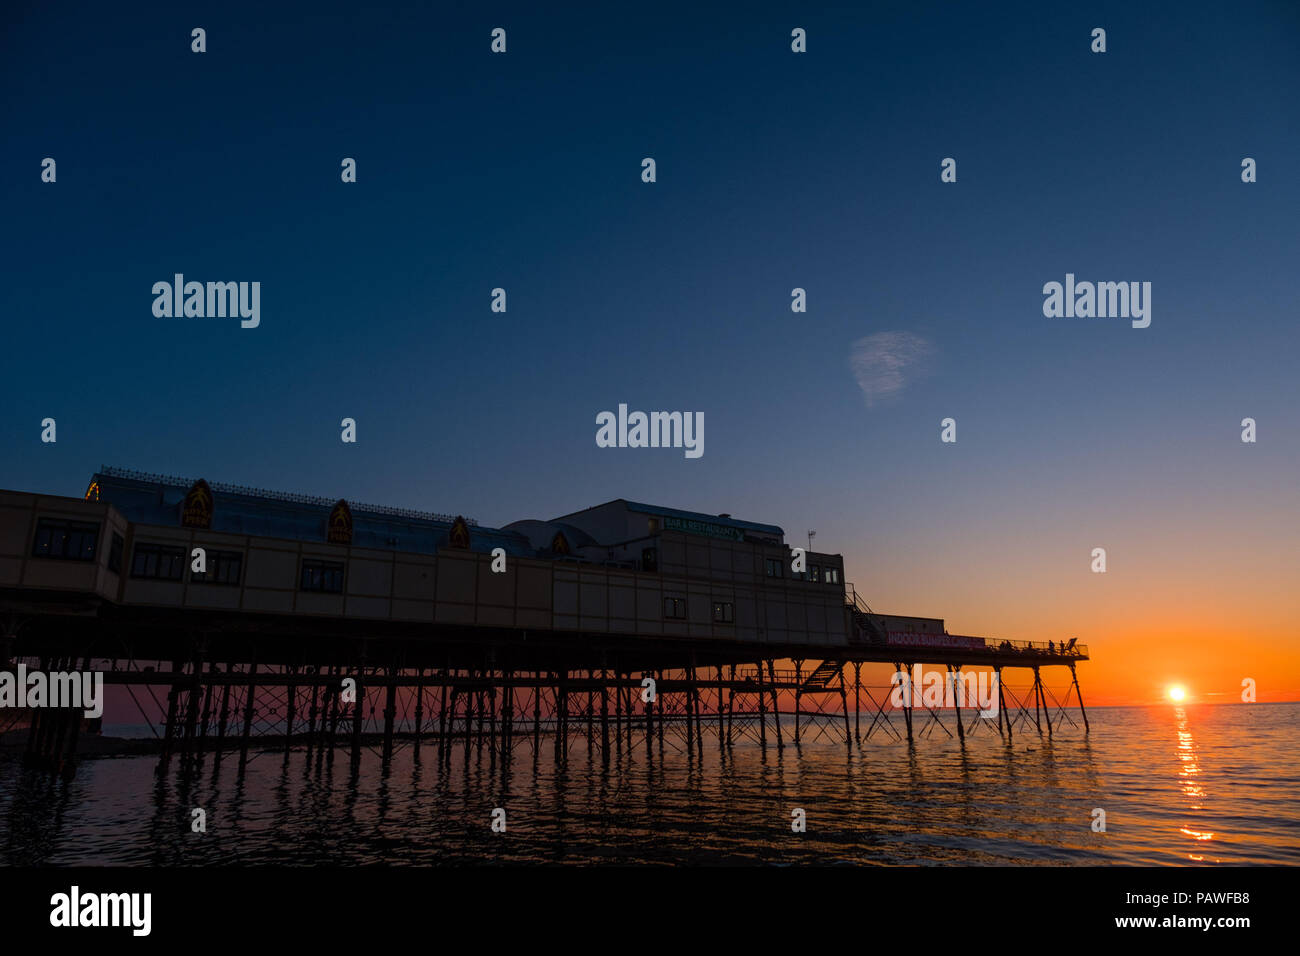 Aberystwyth Wales UK, Wednesday 25 July 2018  UK Weather: People  are silhouetted by the glorious setting sun over Aberystwyth pier at the end of a day of hot summer sunshine.  The UK wide heatwave continues, with little respite from the very dry weather  despite some rain in the forecast for the weekend  Photo credit: Keith Morris / Alamy Live News Stock Photo